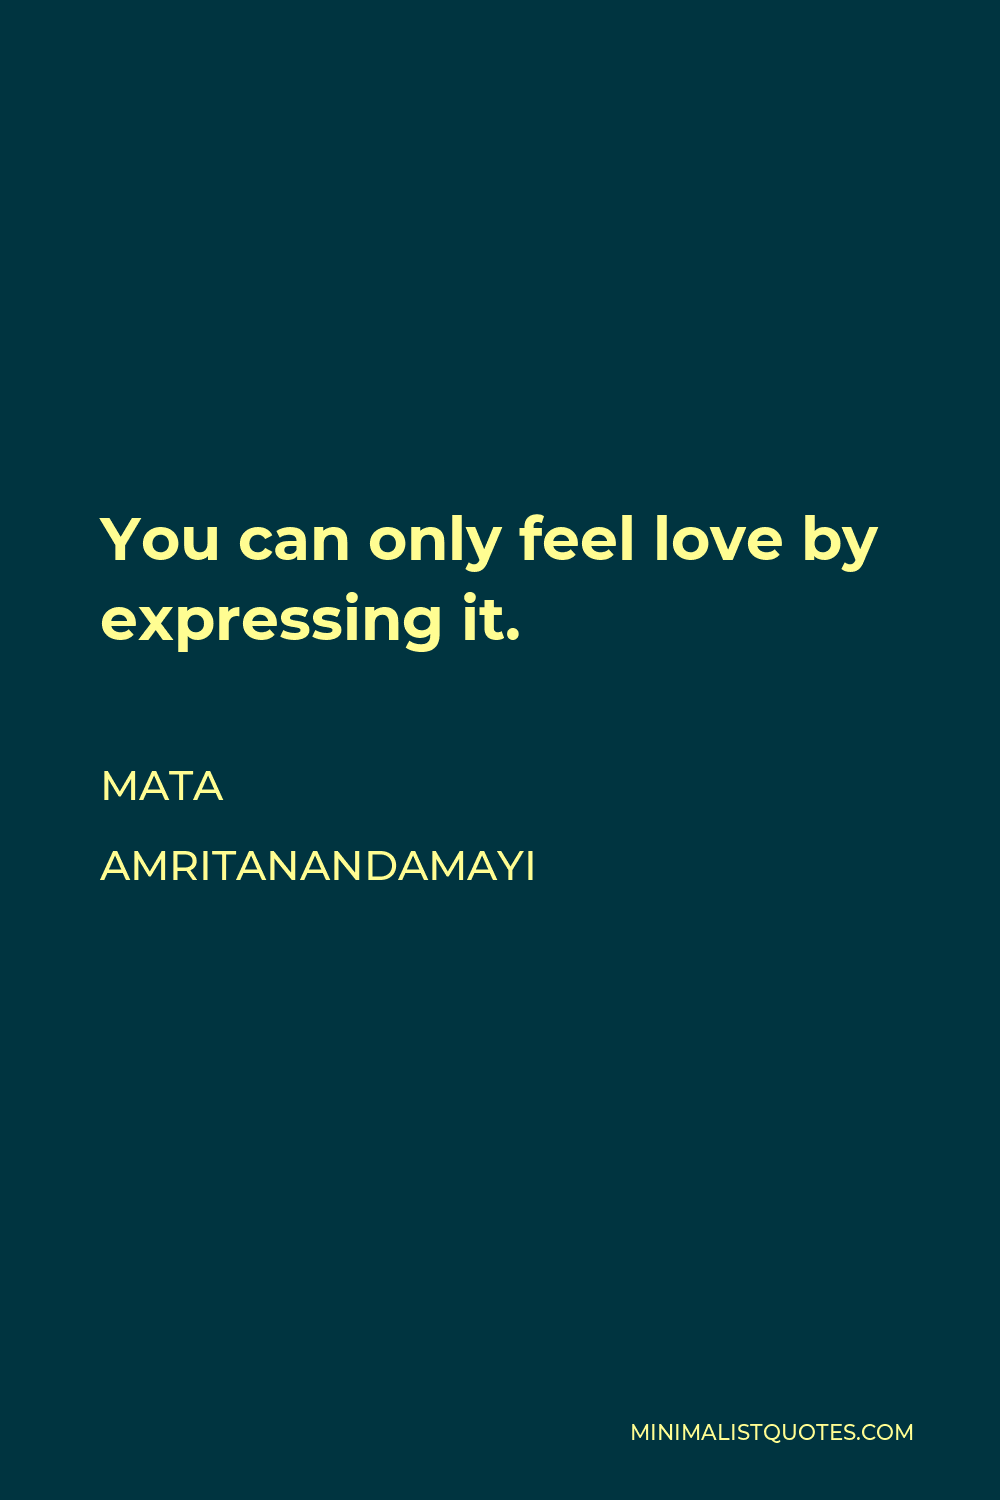 Mata Amritanandamayi Quote - You can only feel love by expressing it.